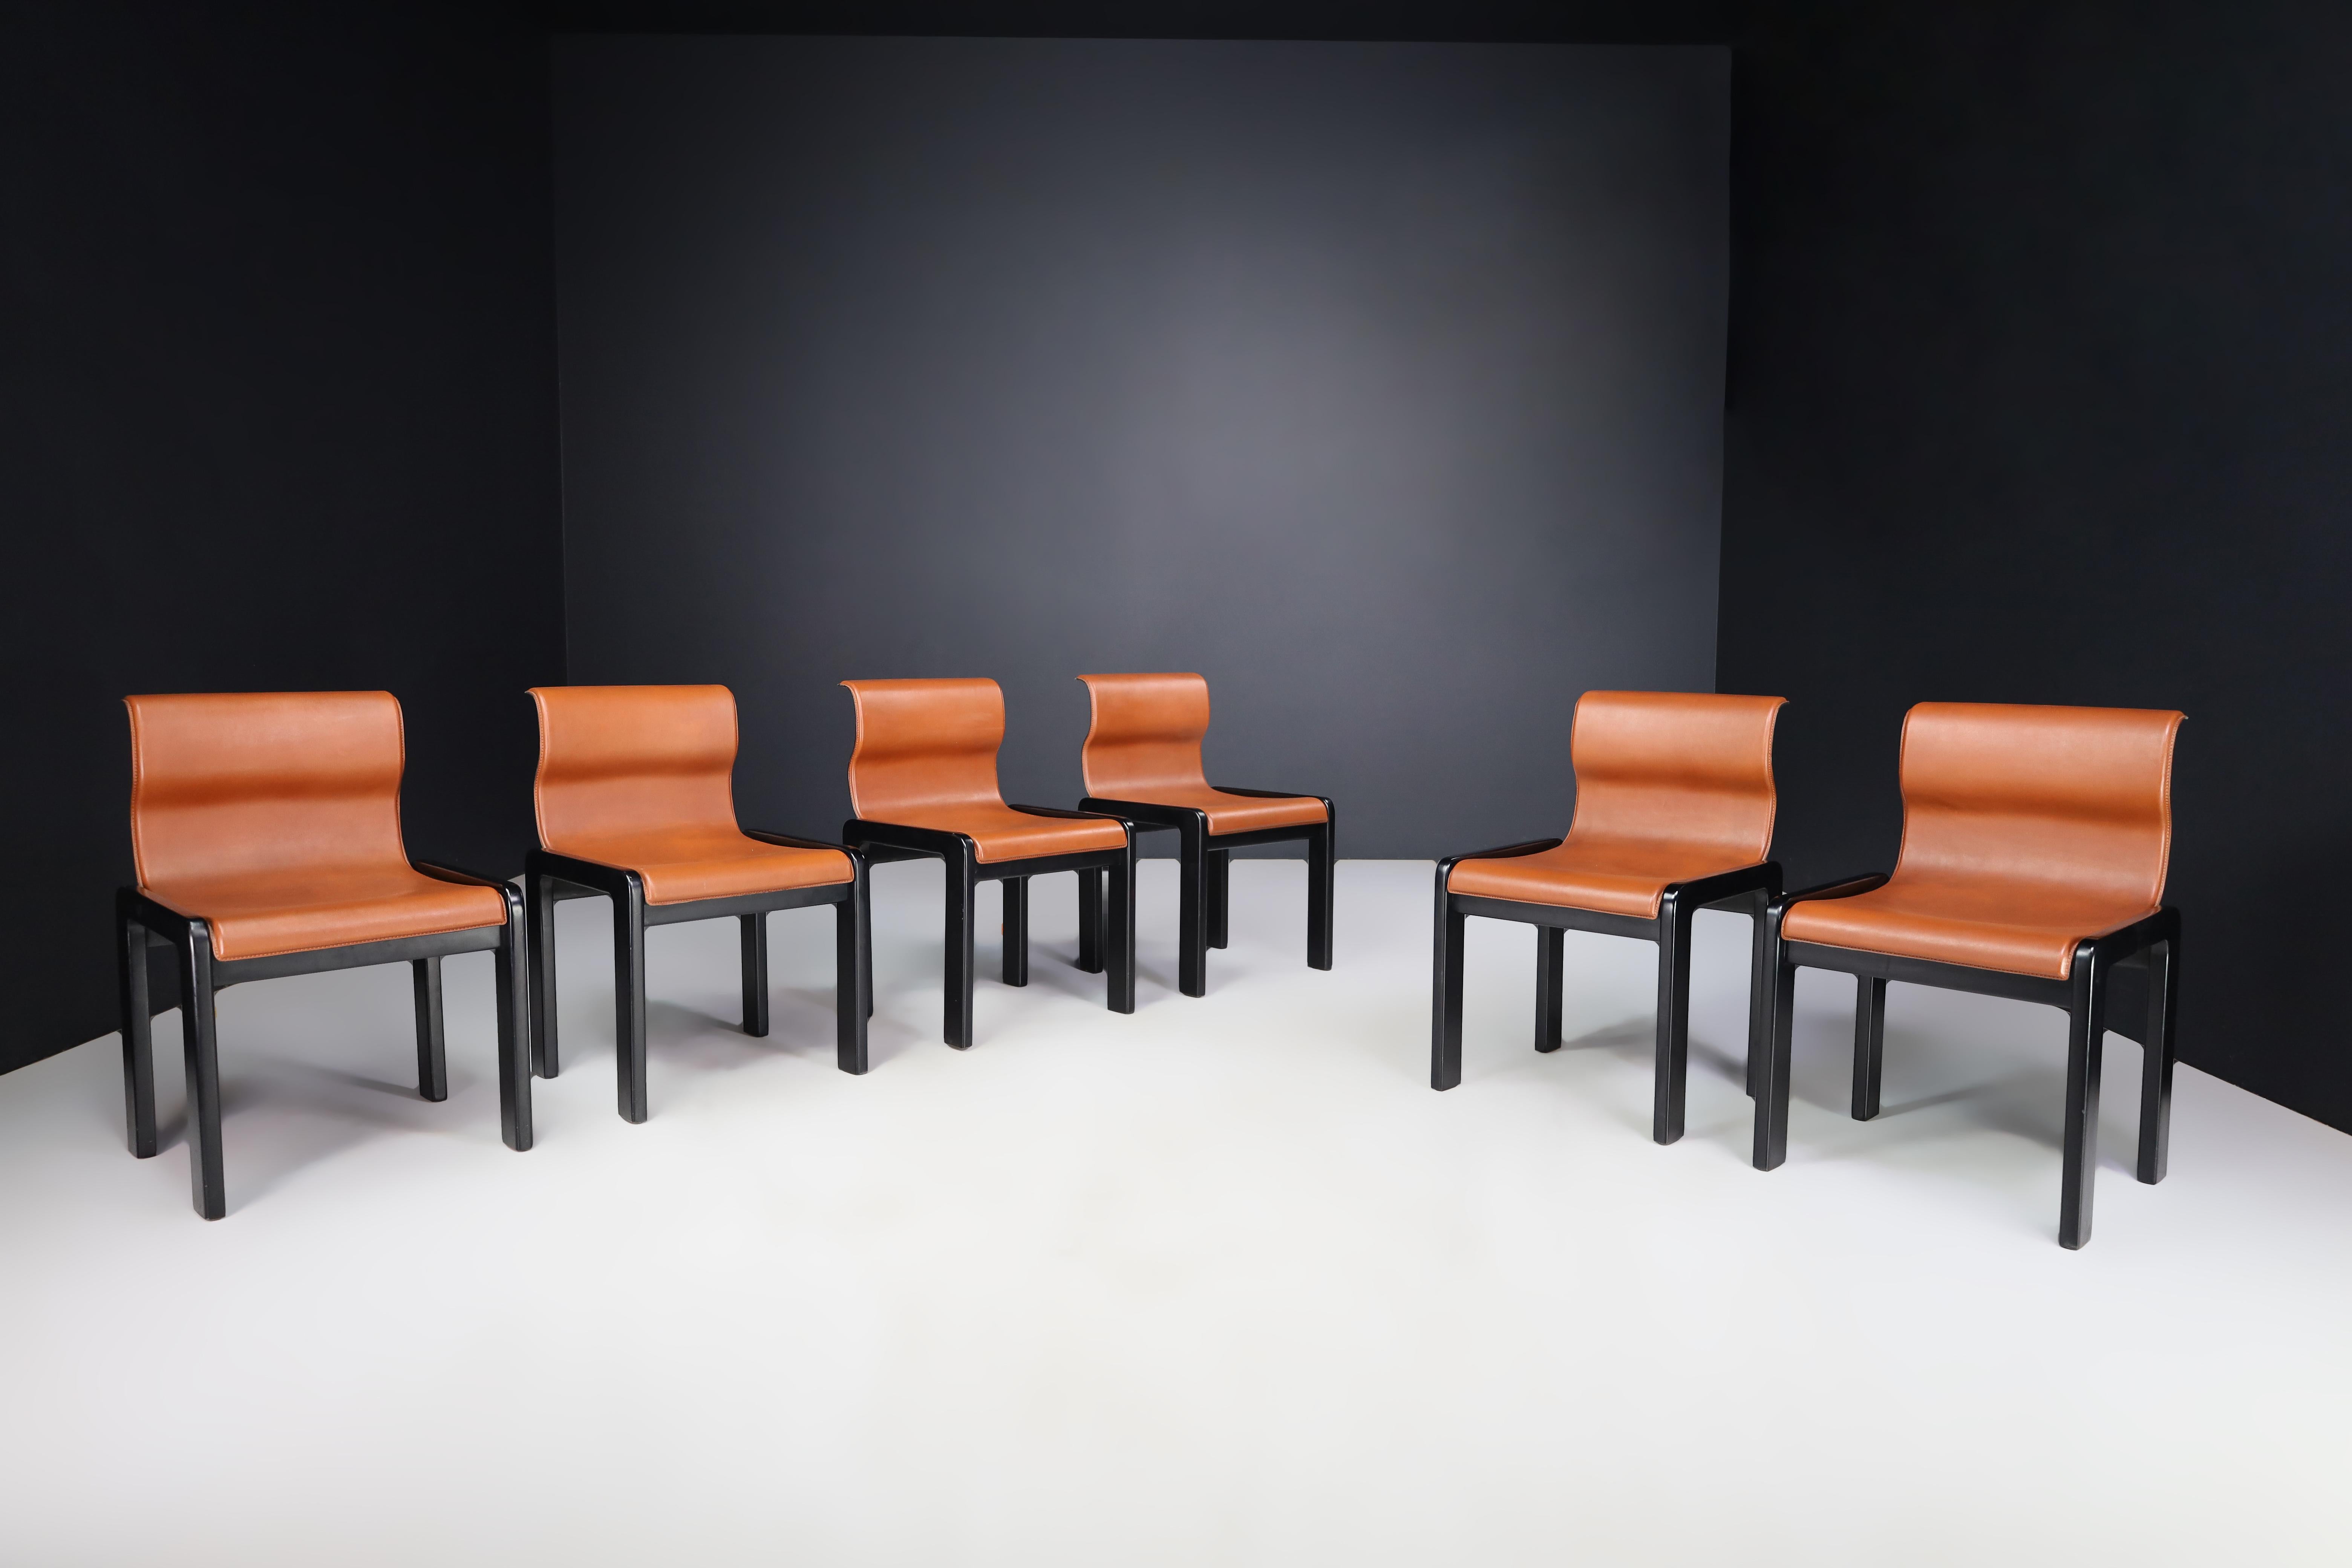 Afra & Tobia Scarpa set of six dining room chairs in cognac leather and black lacquered wood, Italy 1966

This is a fantastic set of six dining room chairs made of cognac brown leather and black lacquered wood. They were designed in Italy in 1966 by